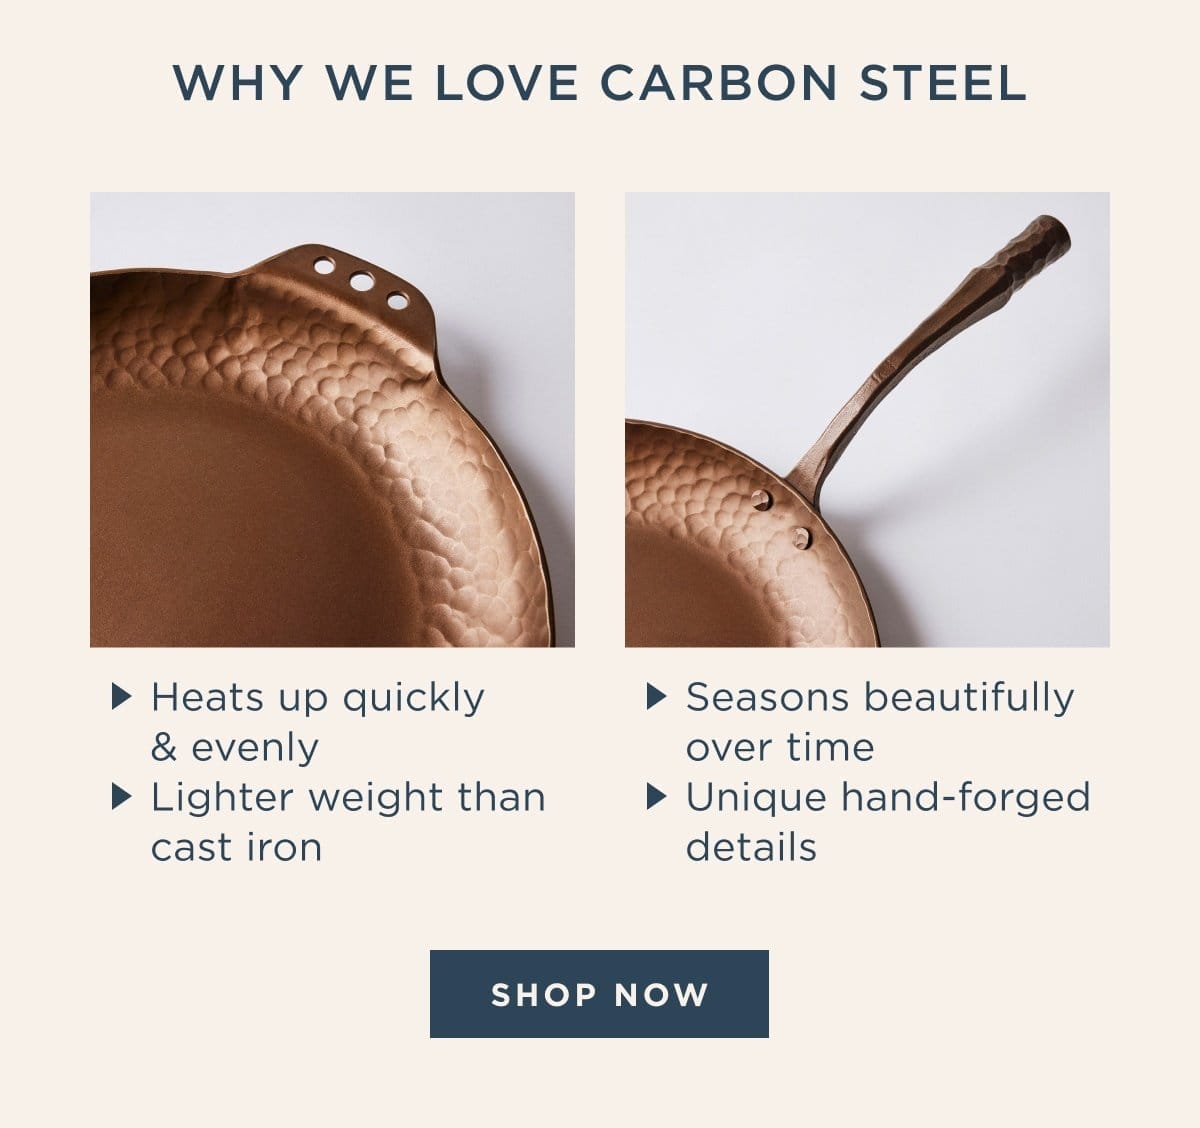 Why We Love Carbon Steel